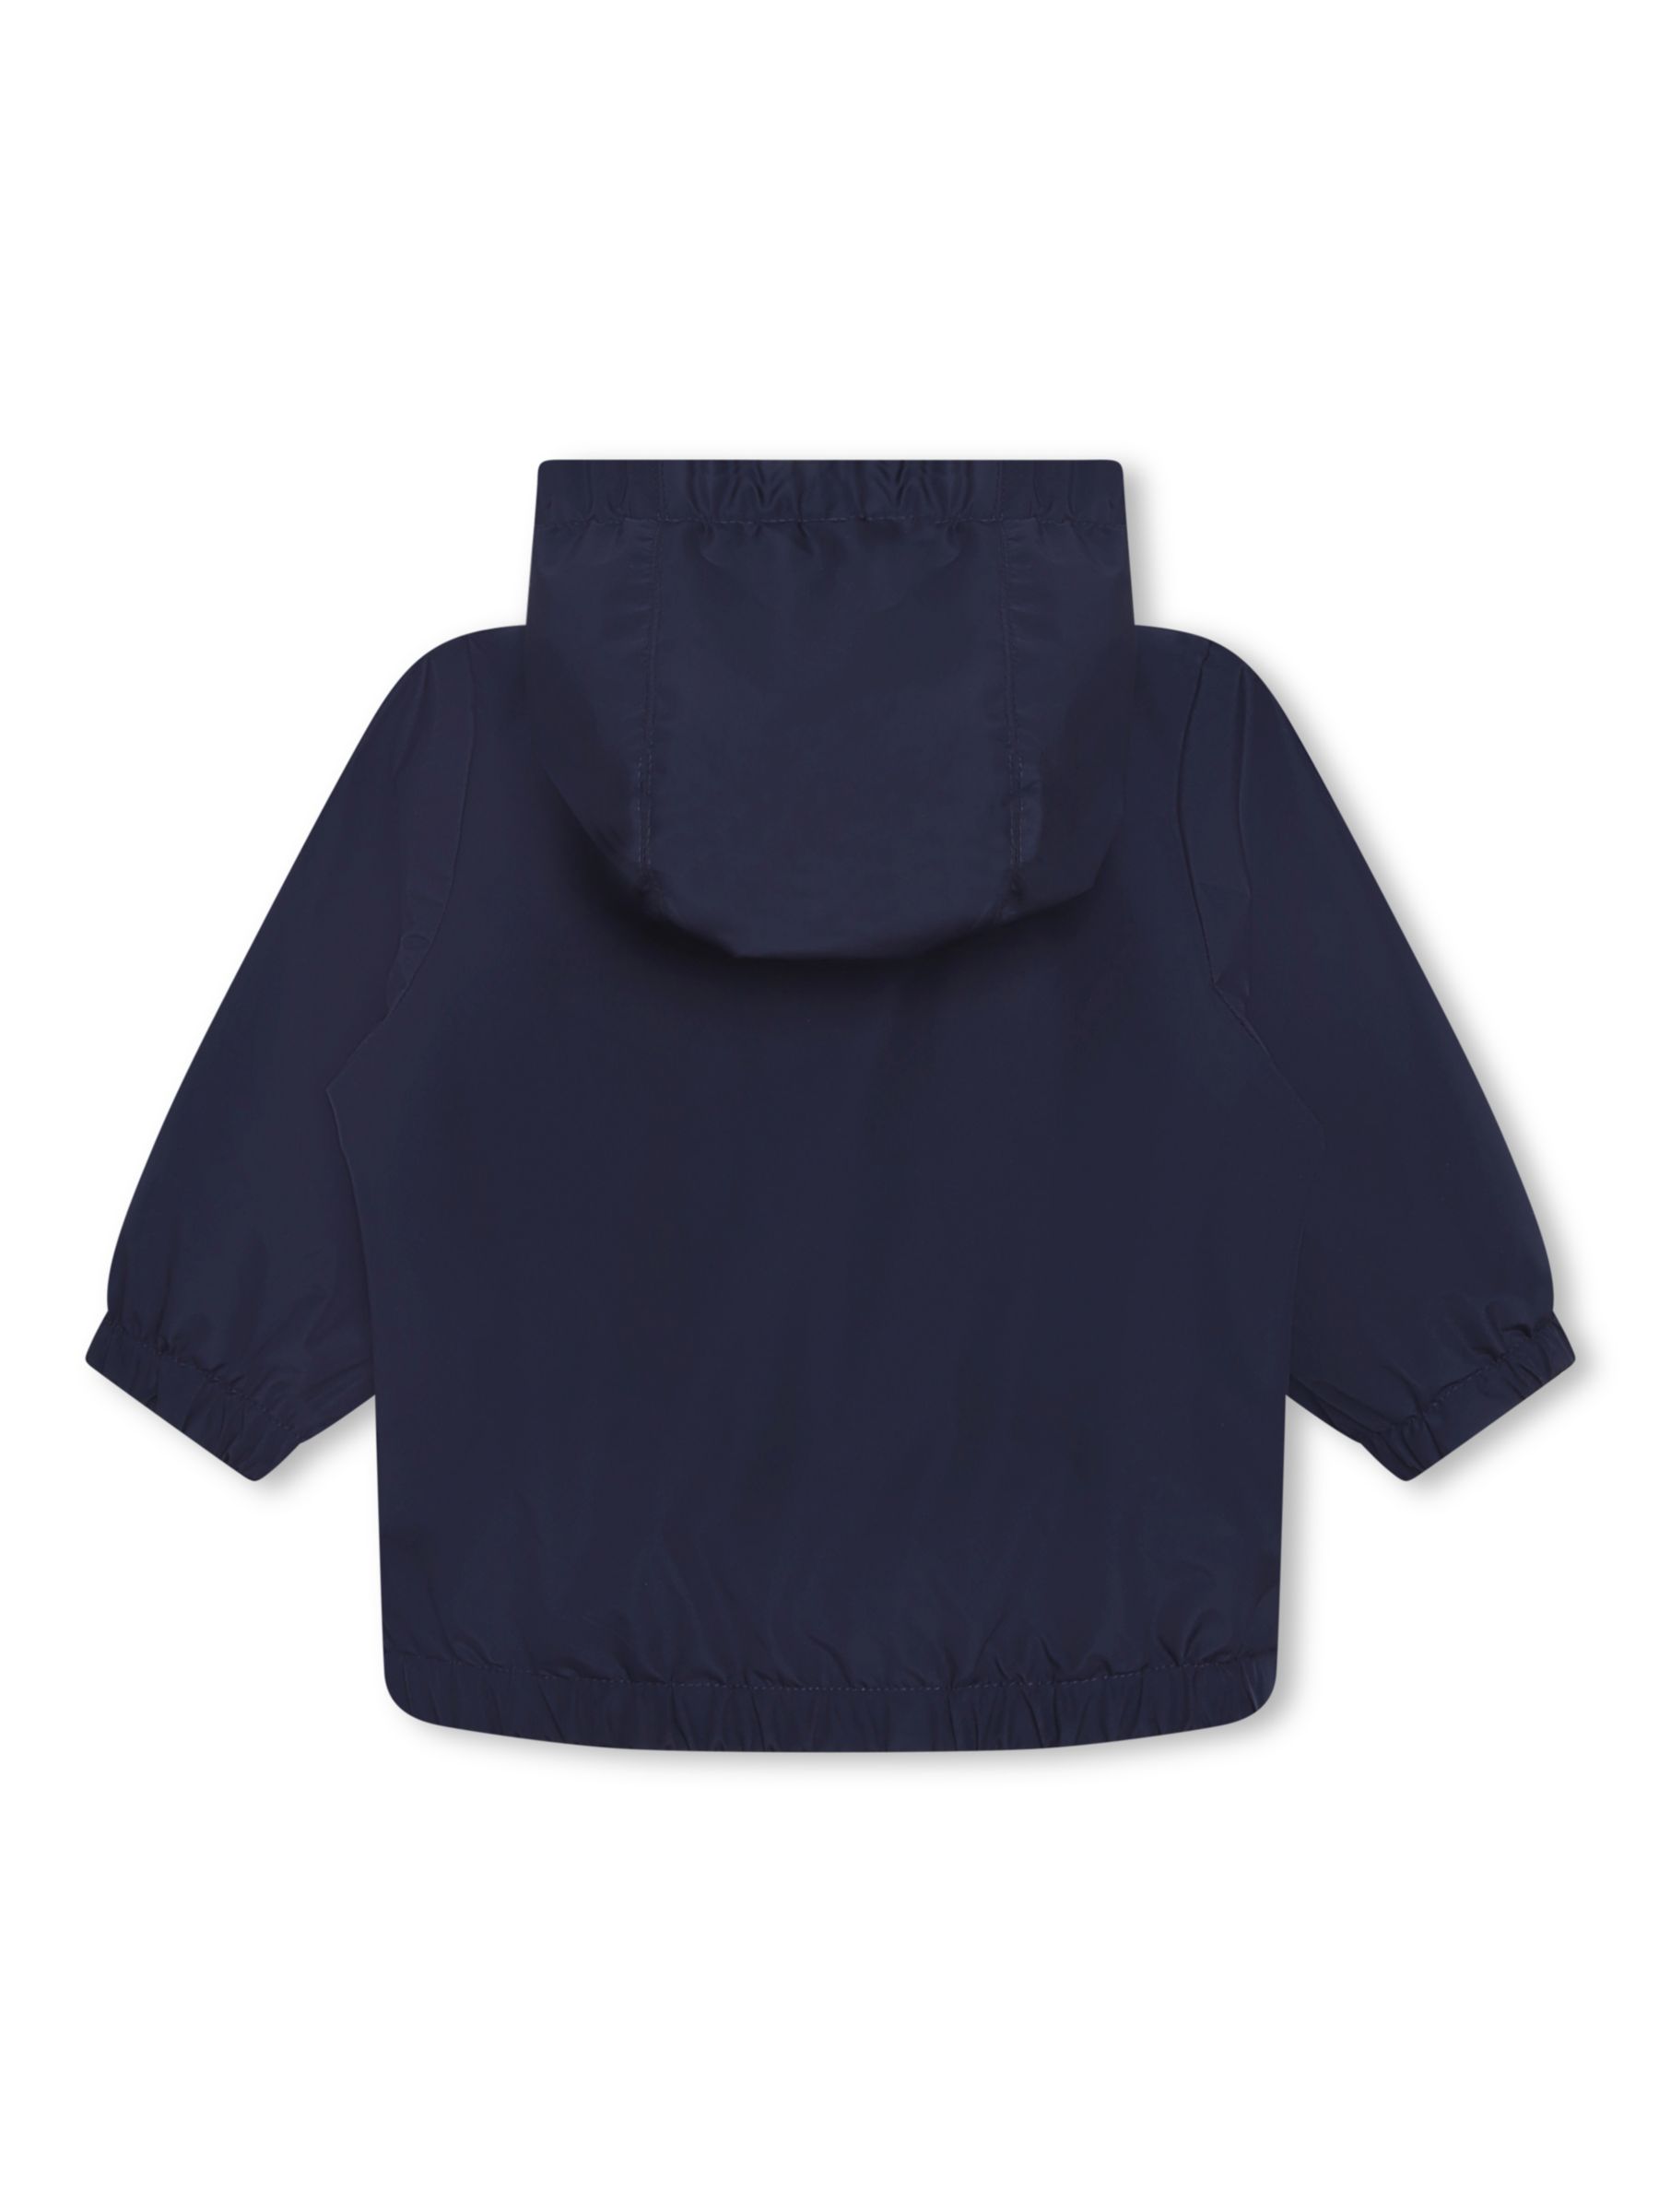 Buy Timberland Baby Logo Embroidered Windbreaker, Navy Online at johnlewis.com